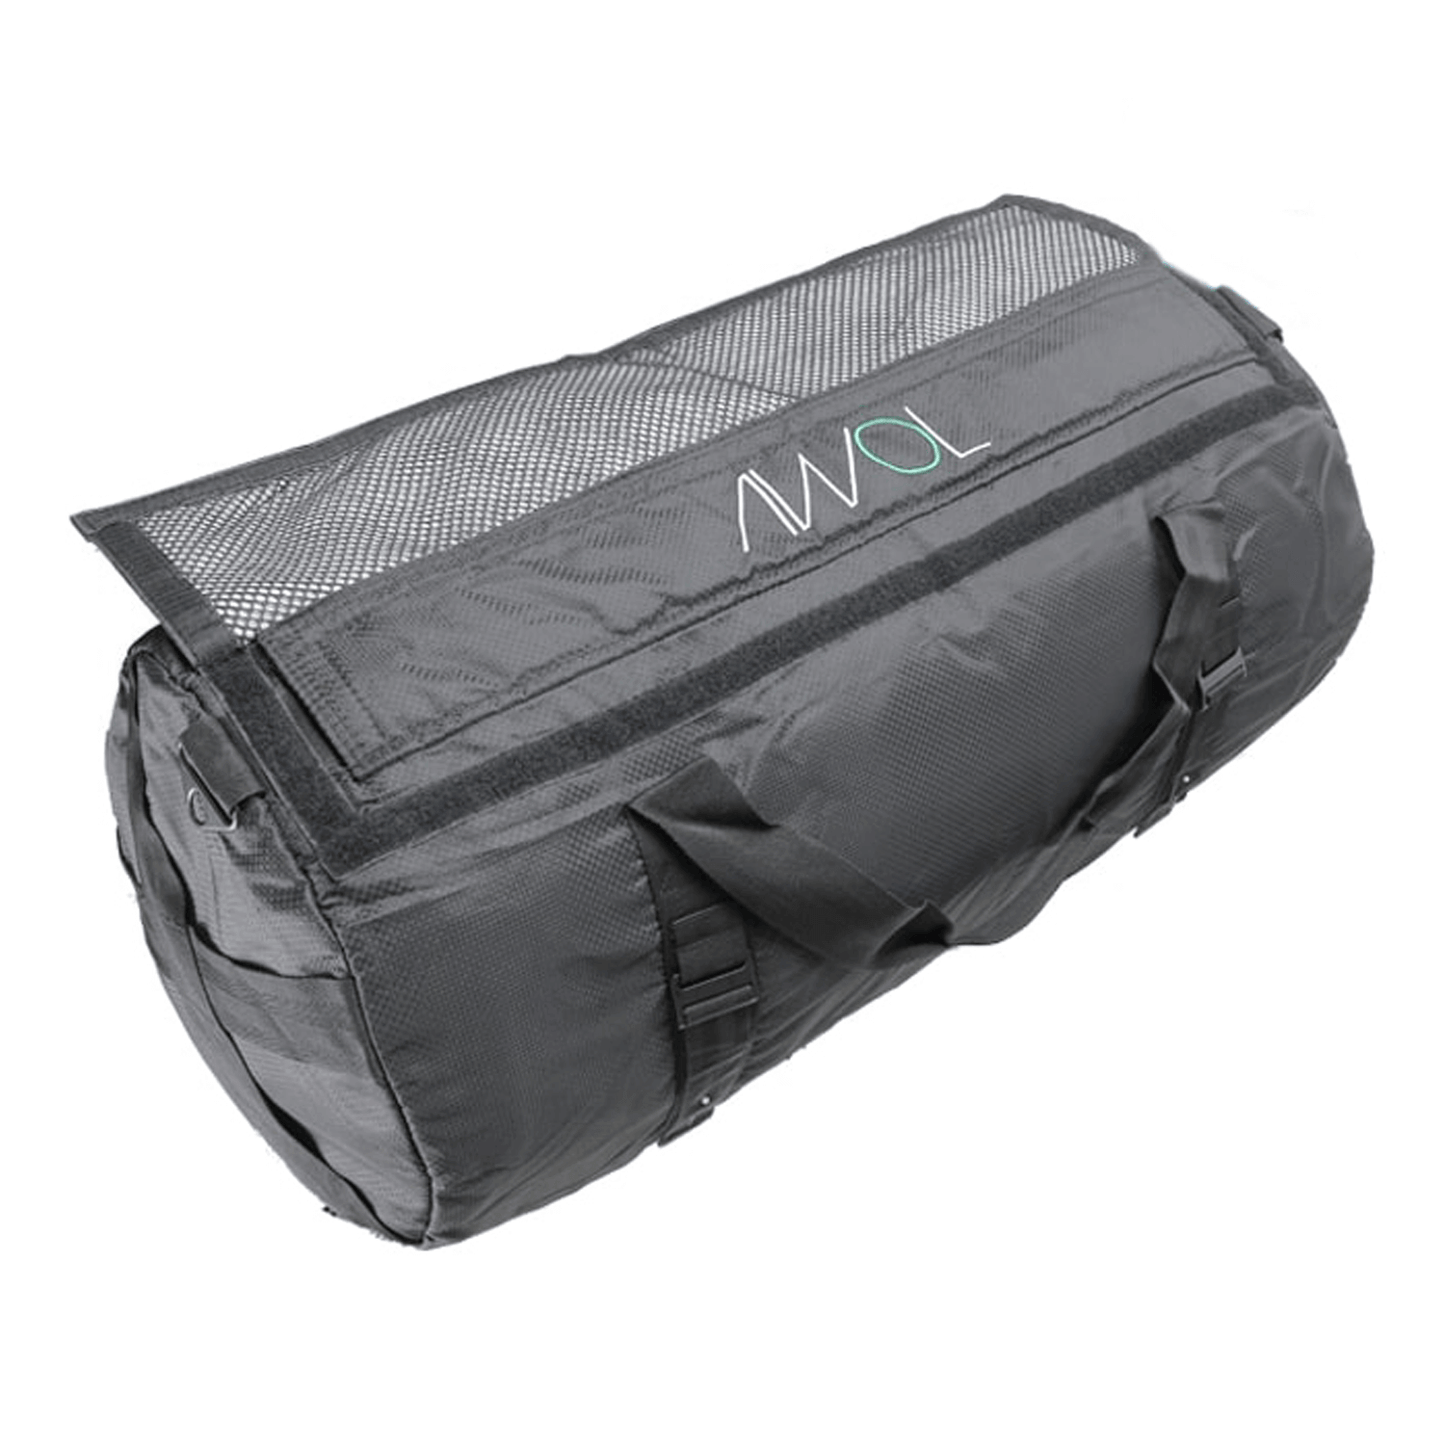 AWOL DAILY X-Large Ripstop Black Duffle Bag 886131 Harvest & Extraction 859097007207